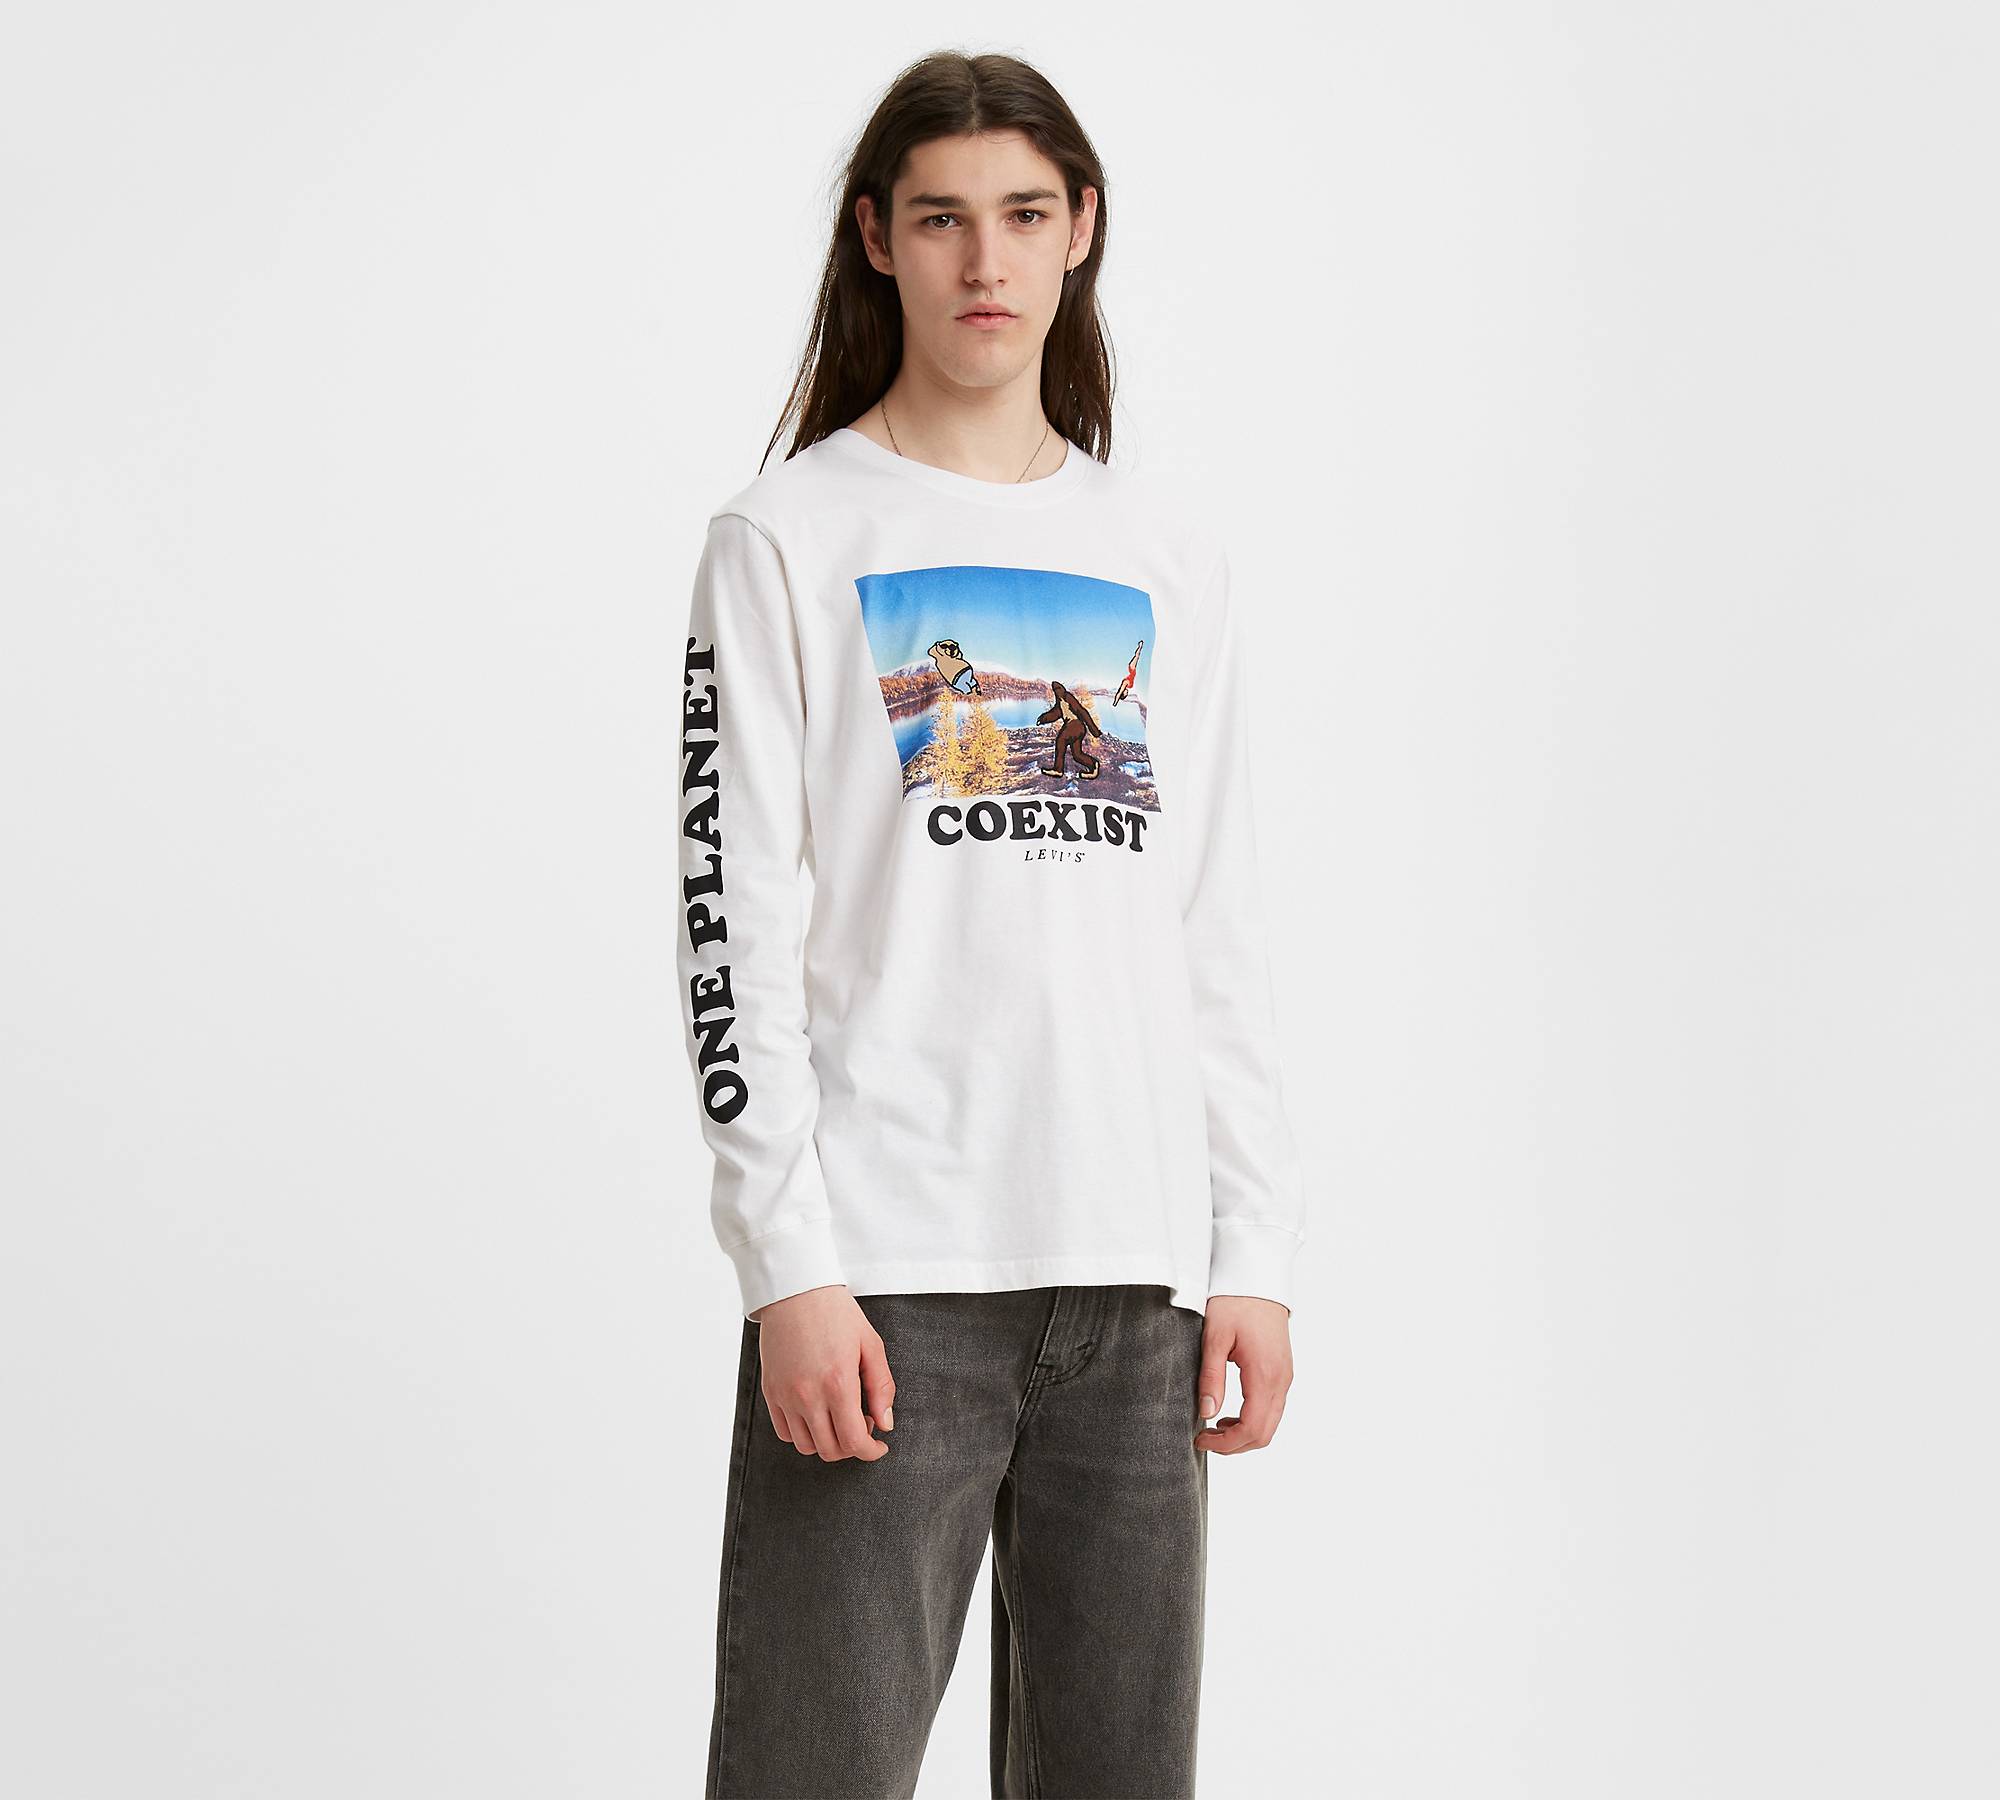 Longsleeve Relaxed Photo Graphic Tee Shirt 1